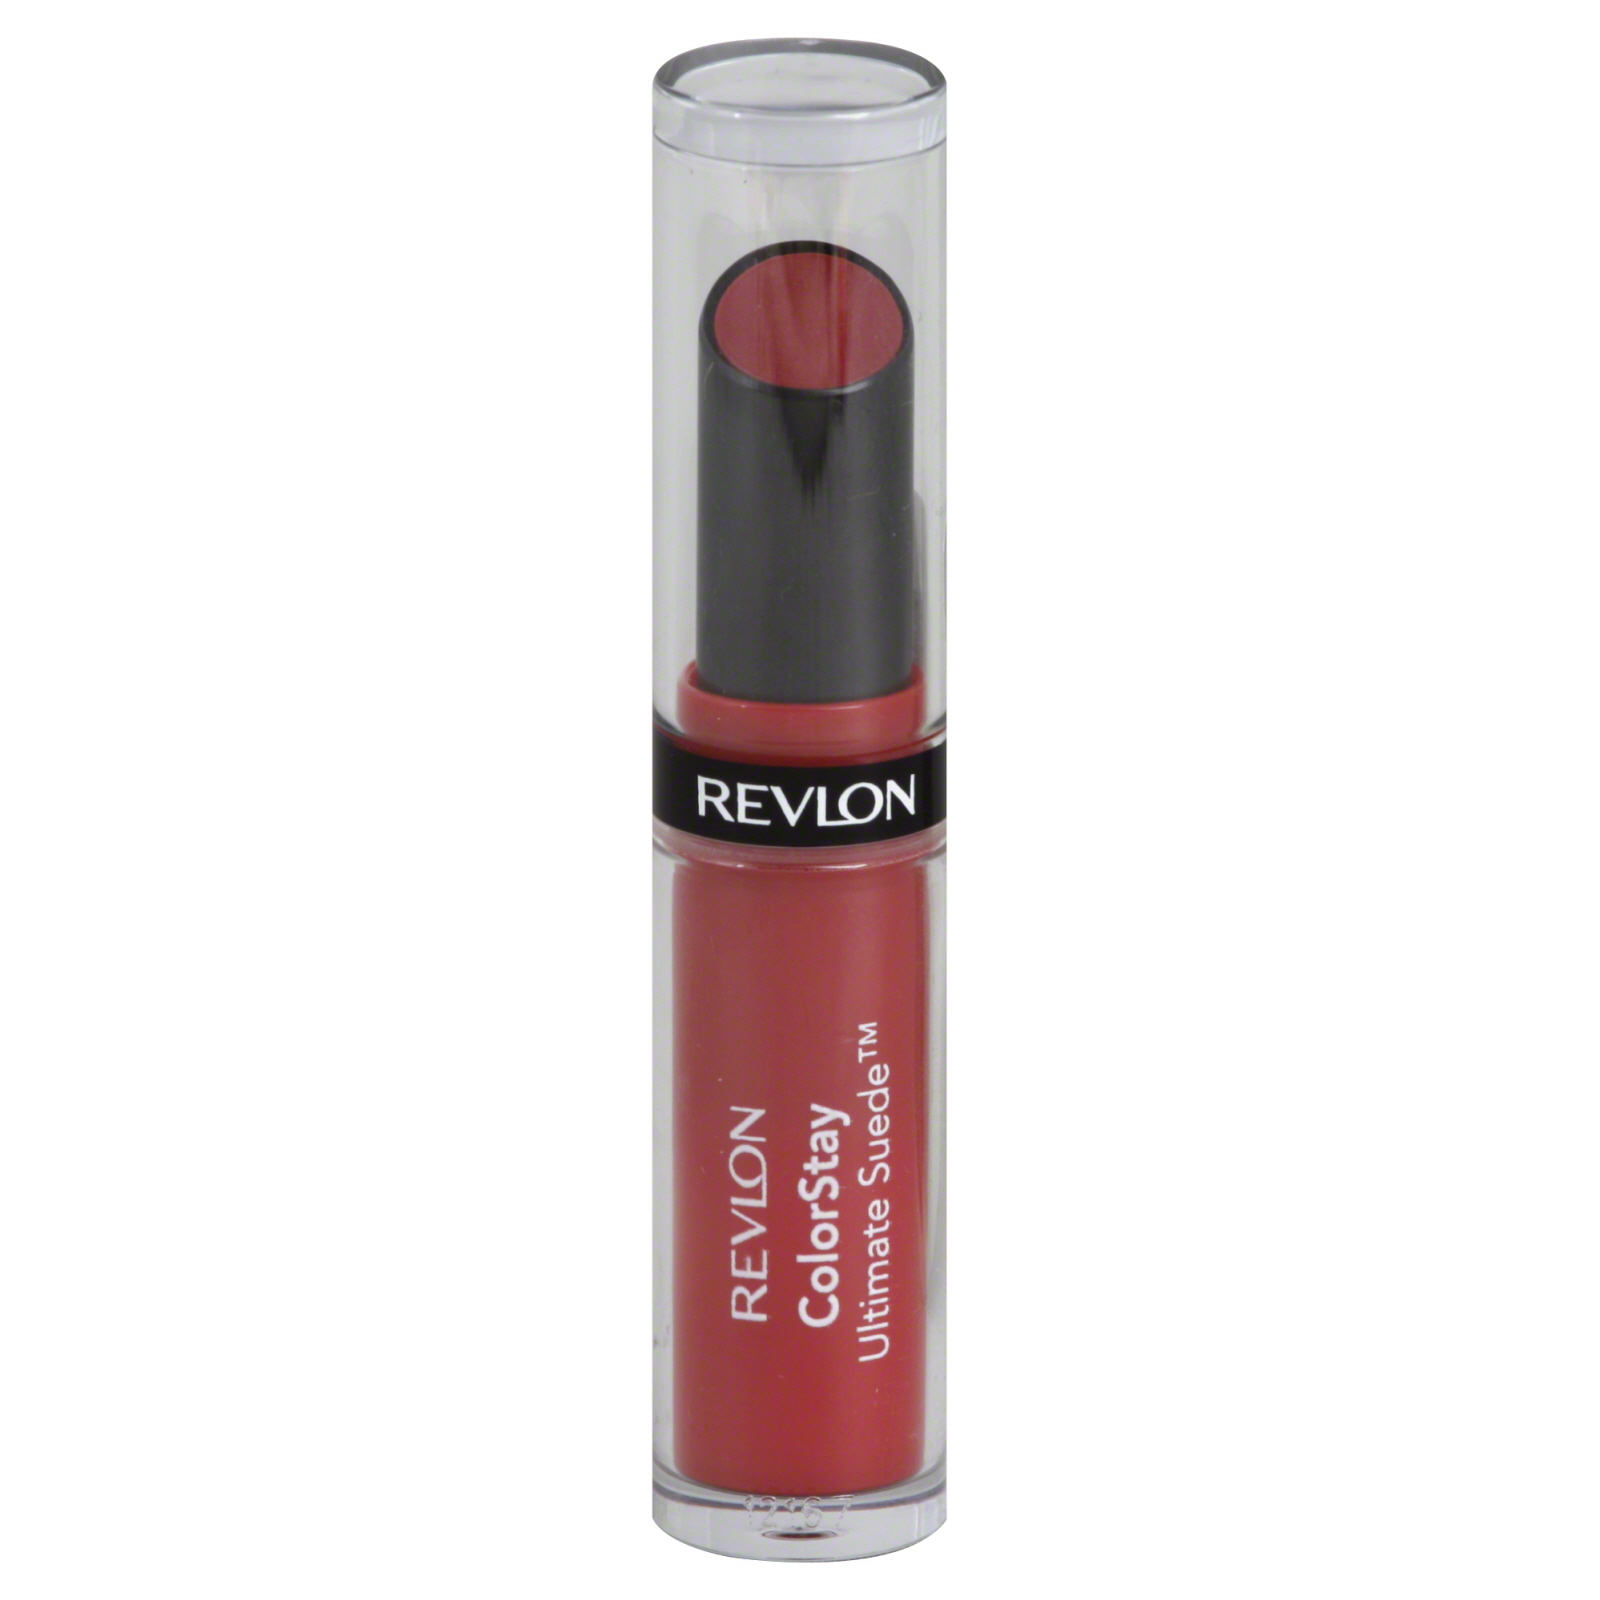 ColorStay Ultimate Suede Lipstick, Couture 050, 0.09 oz (255 g)